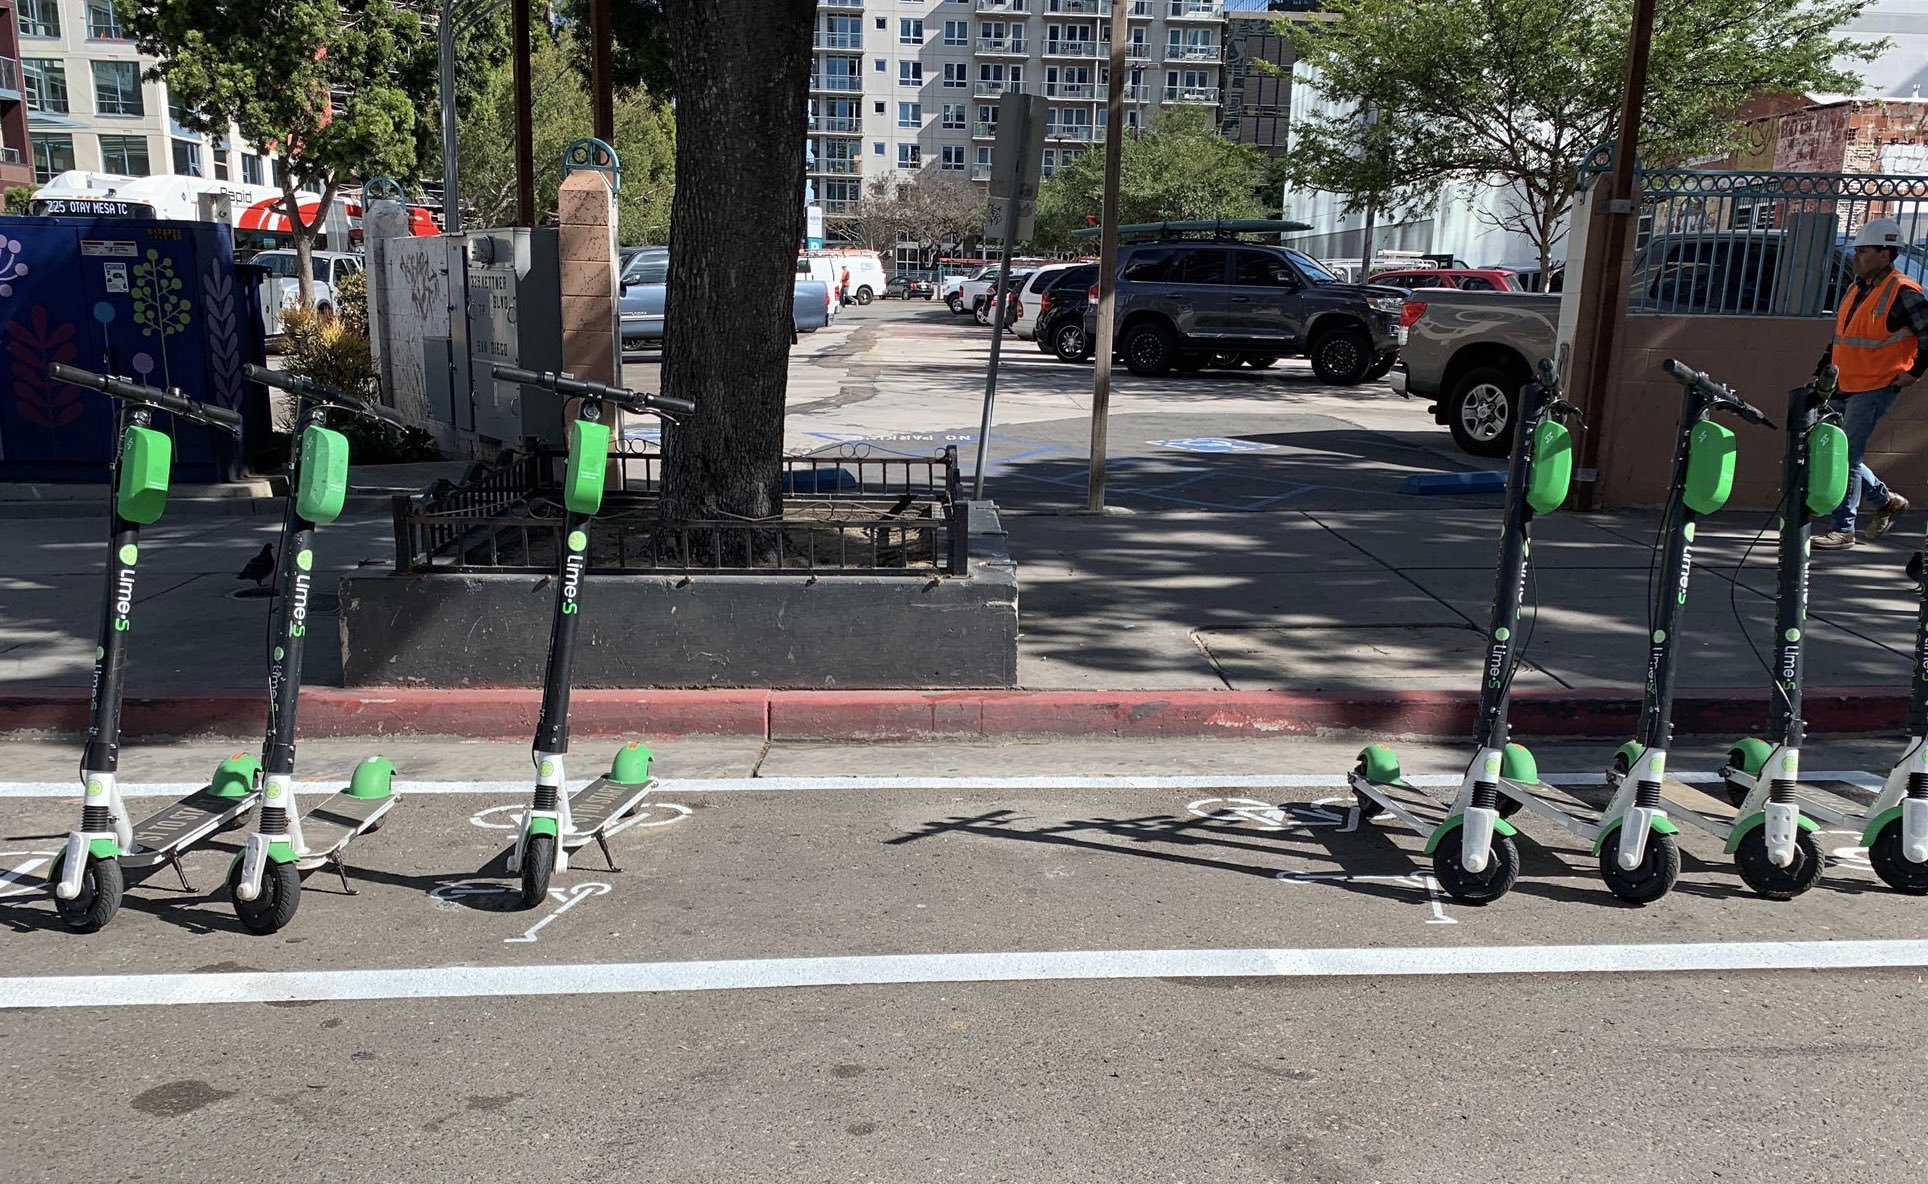 Dockless bikes parked in a dedicated scooter corral on a street.